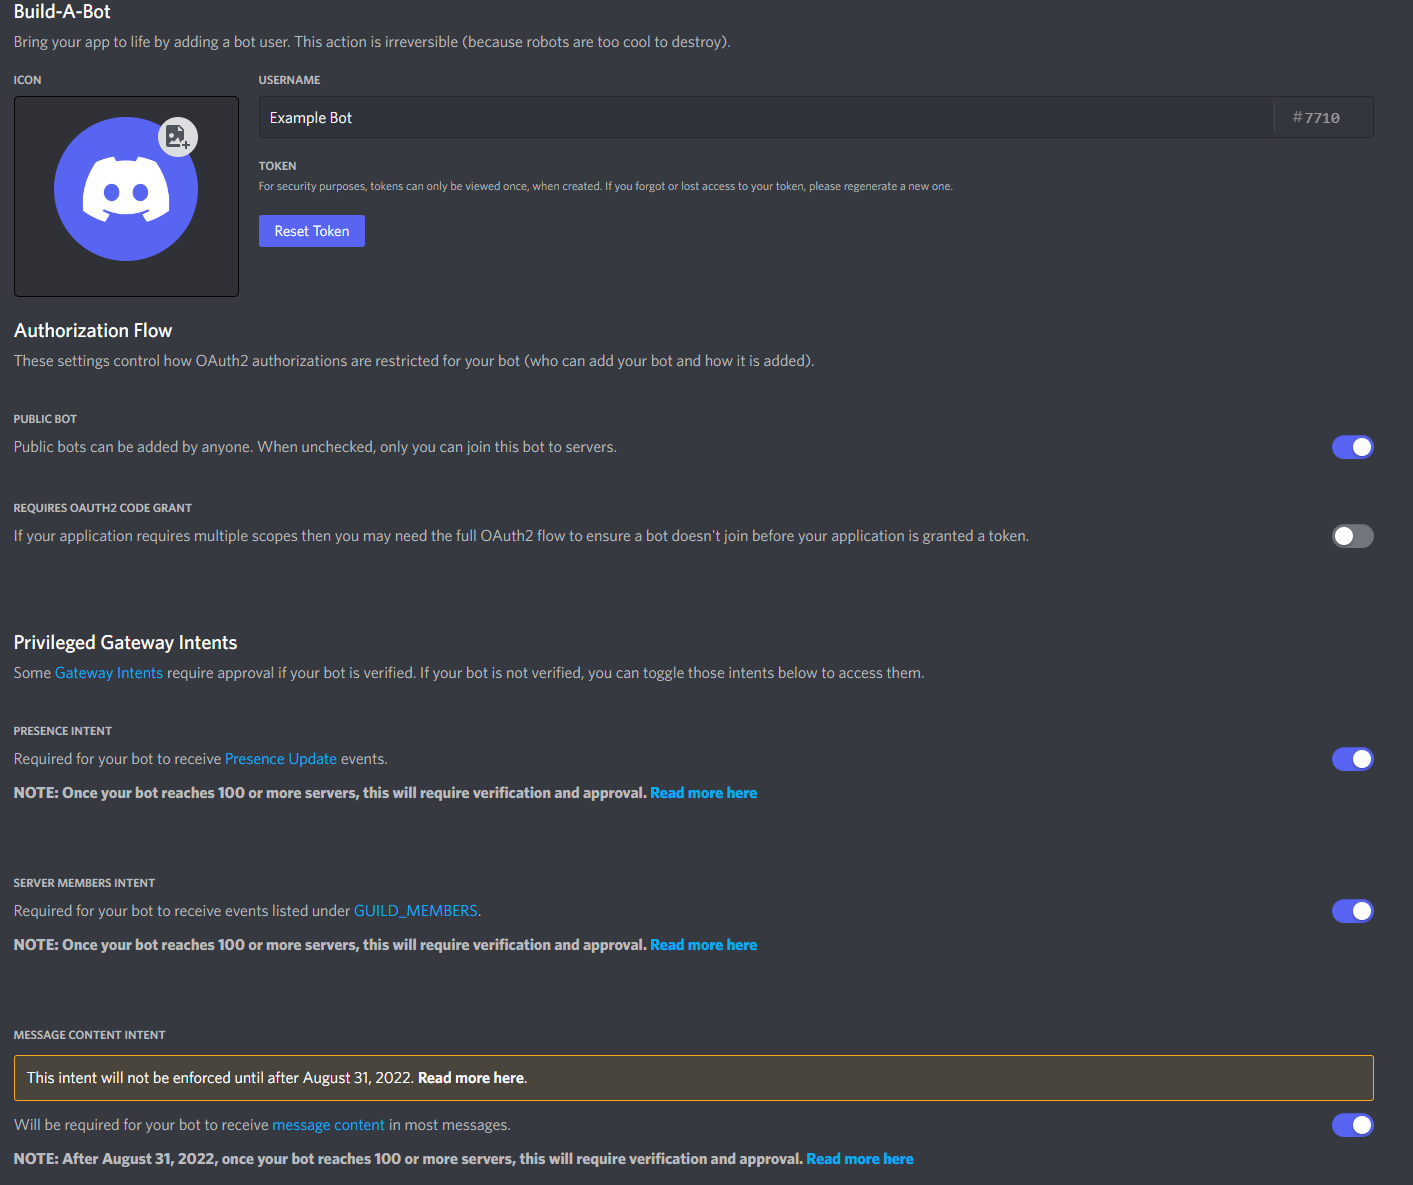 How to Create a Simple Discord Bot using Python